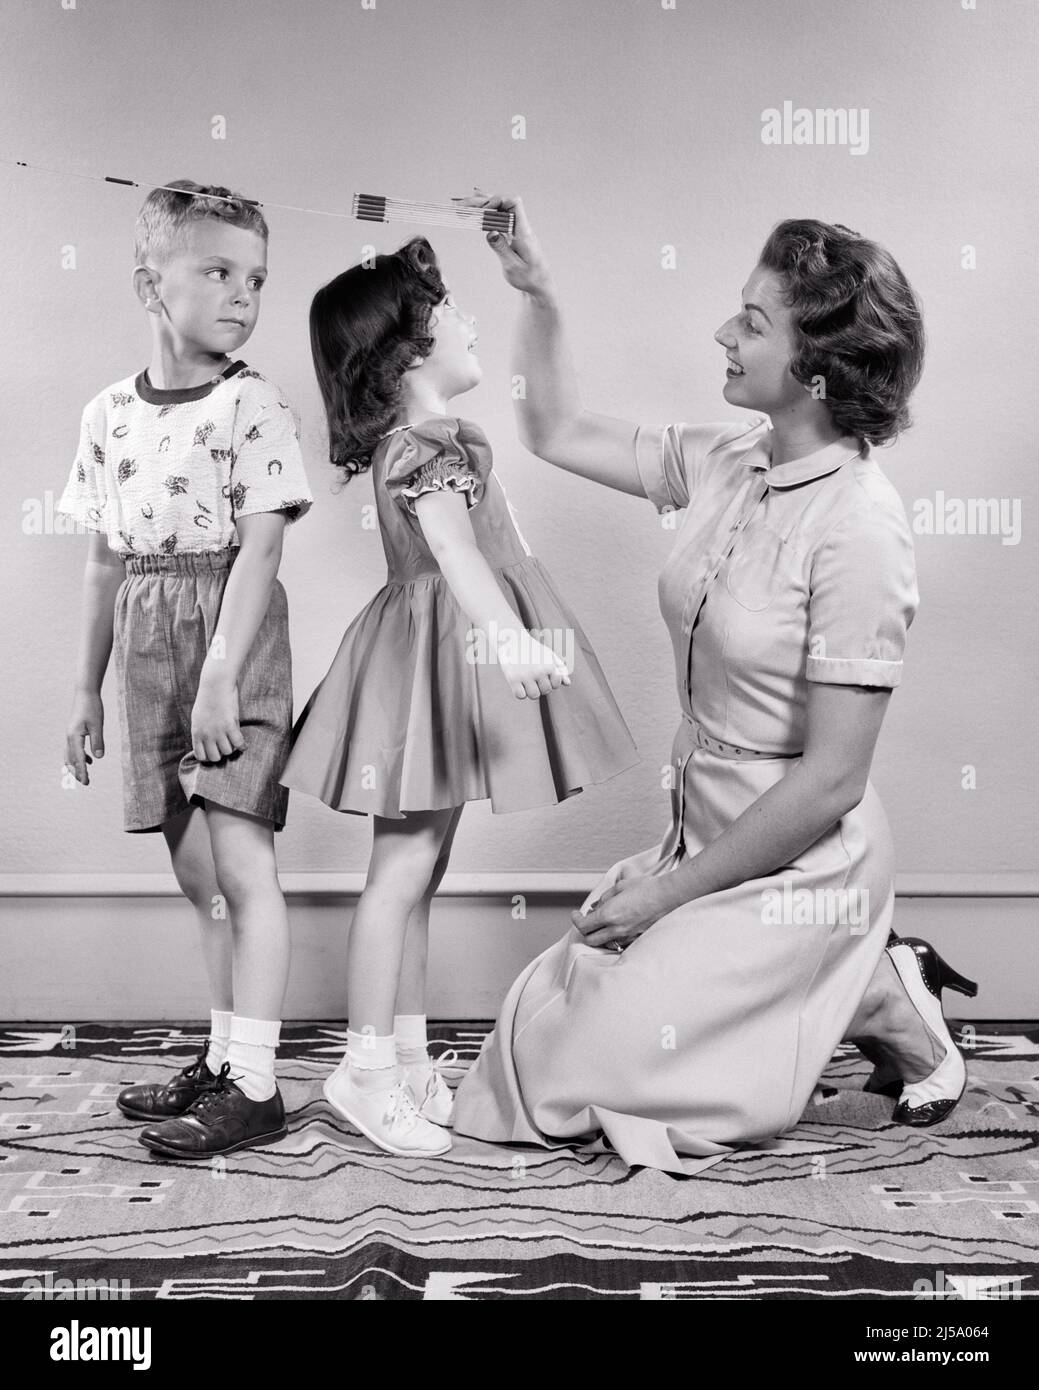 Mother And Sons 1950's High Resolution Stock Photography and Images - Alamy